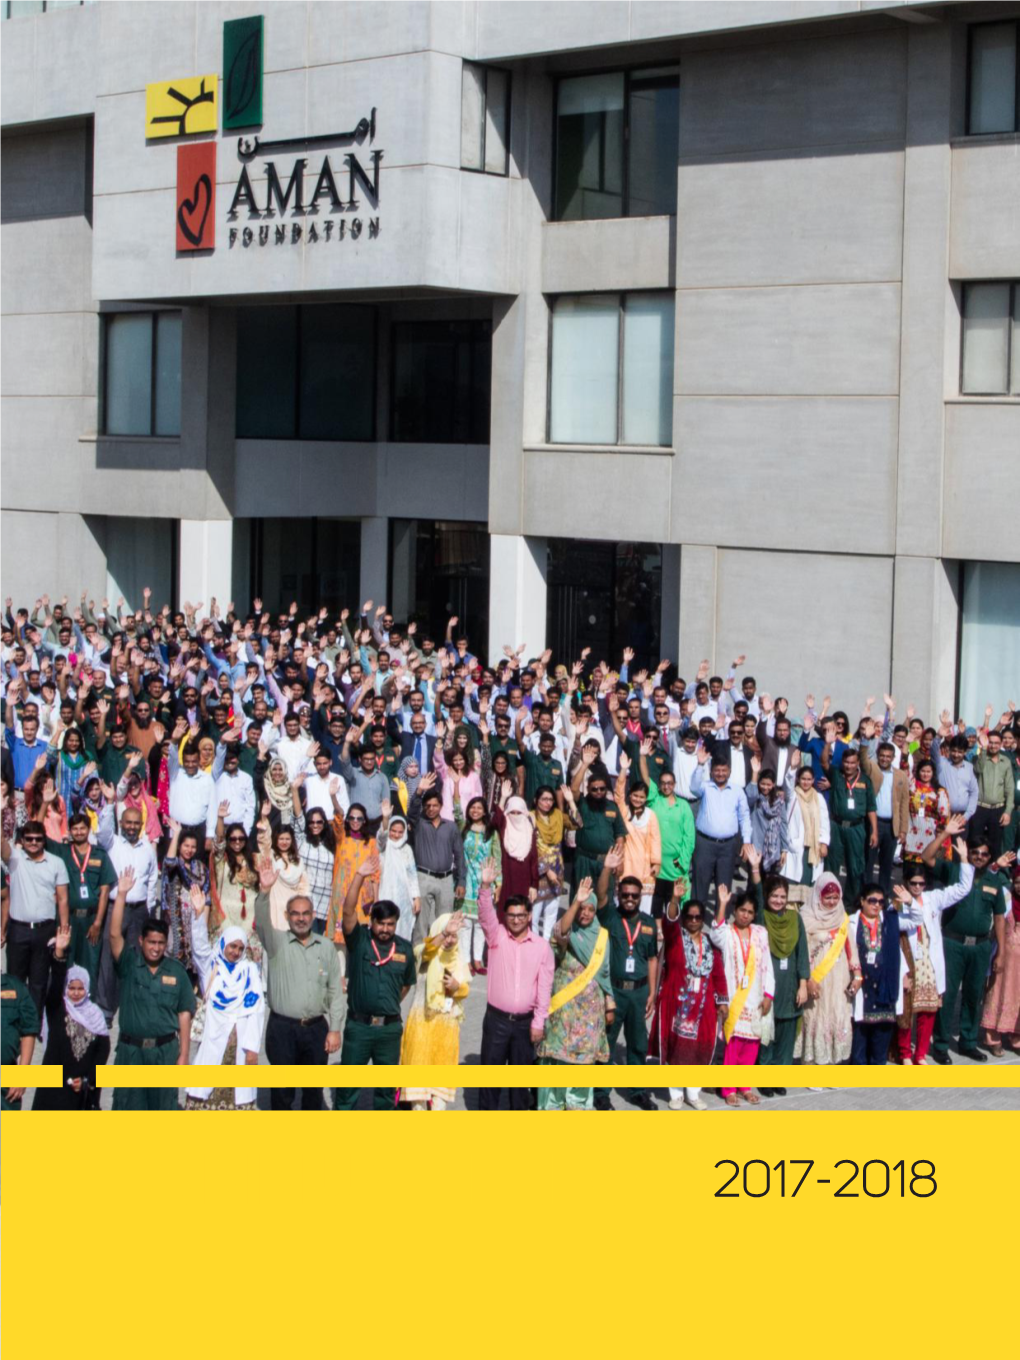 2017-2018 >> the Aman Foundation Is a Social Enterprise, Established As a Not-For-Profit Trust, Based and Operating in Pakistan